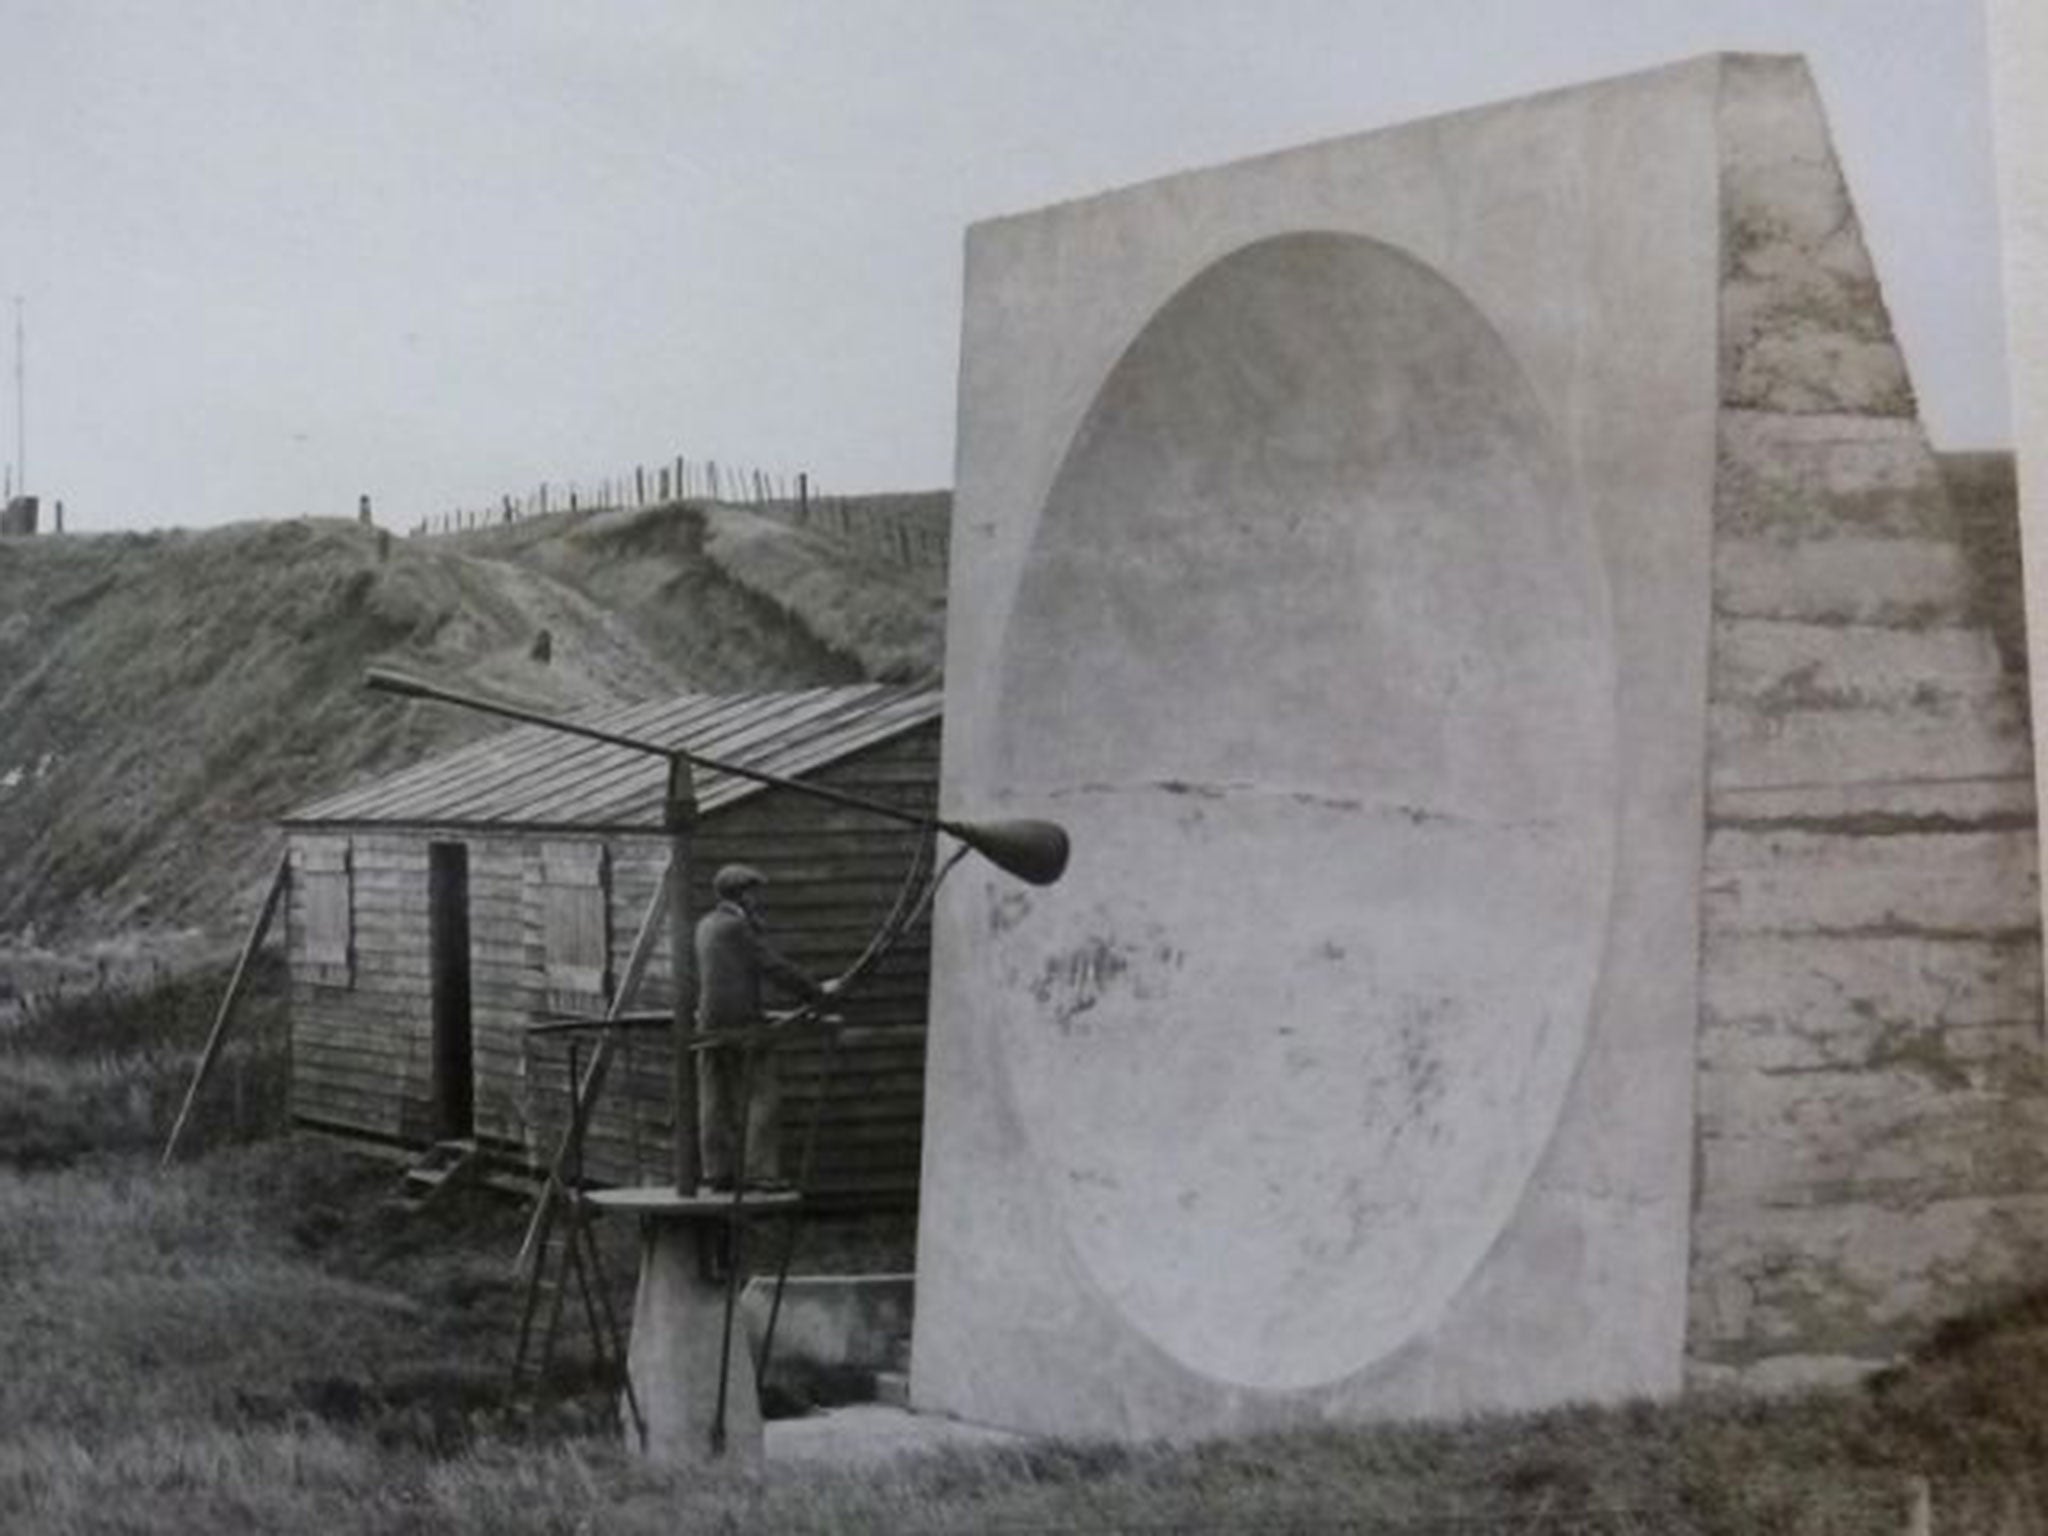 One of the sound mirrors in use at Abbots Cliff, near Dover’s White Cliffs